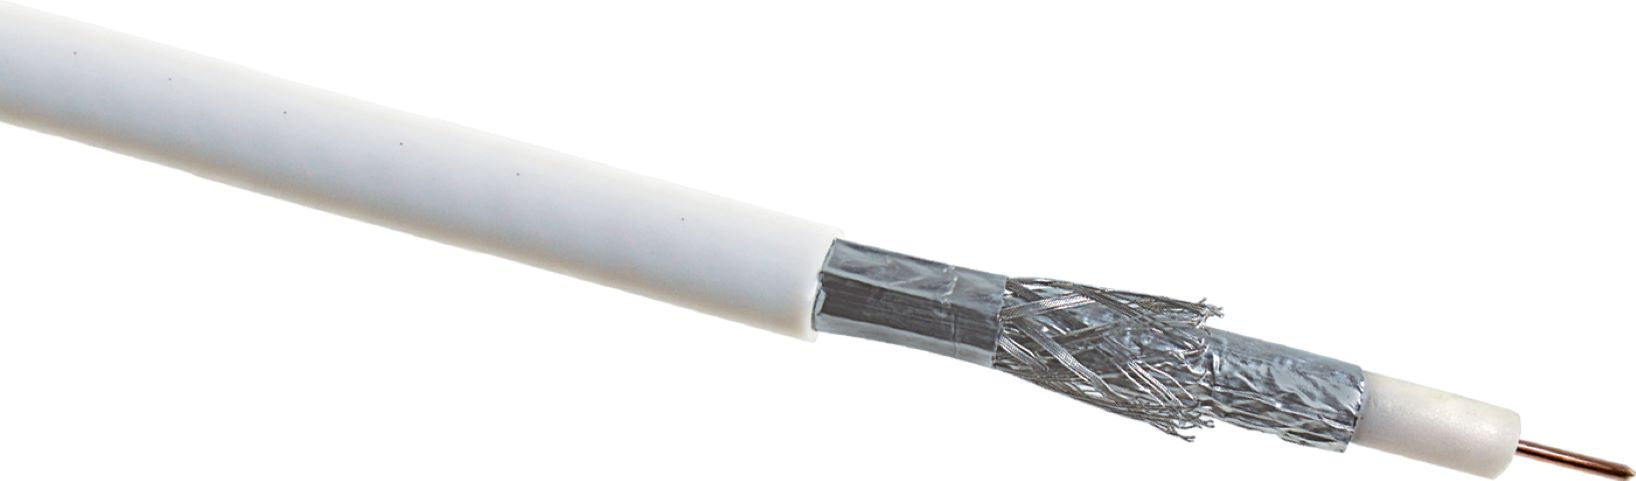 SAT coaxial cable (90 dB)